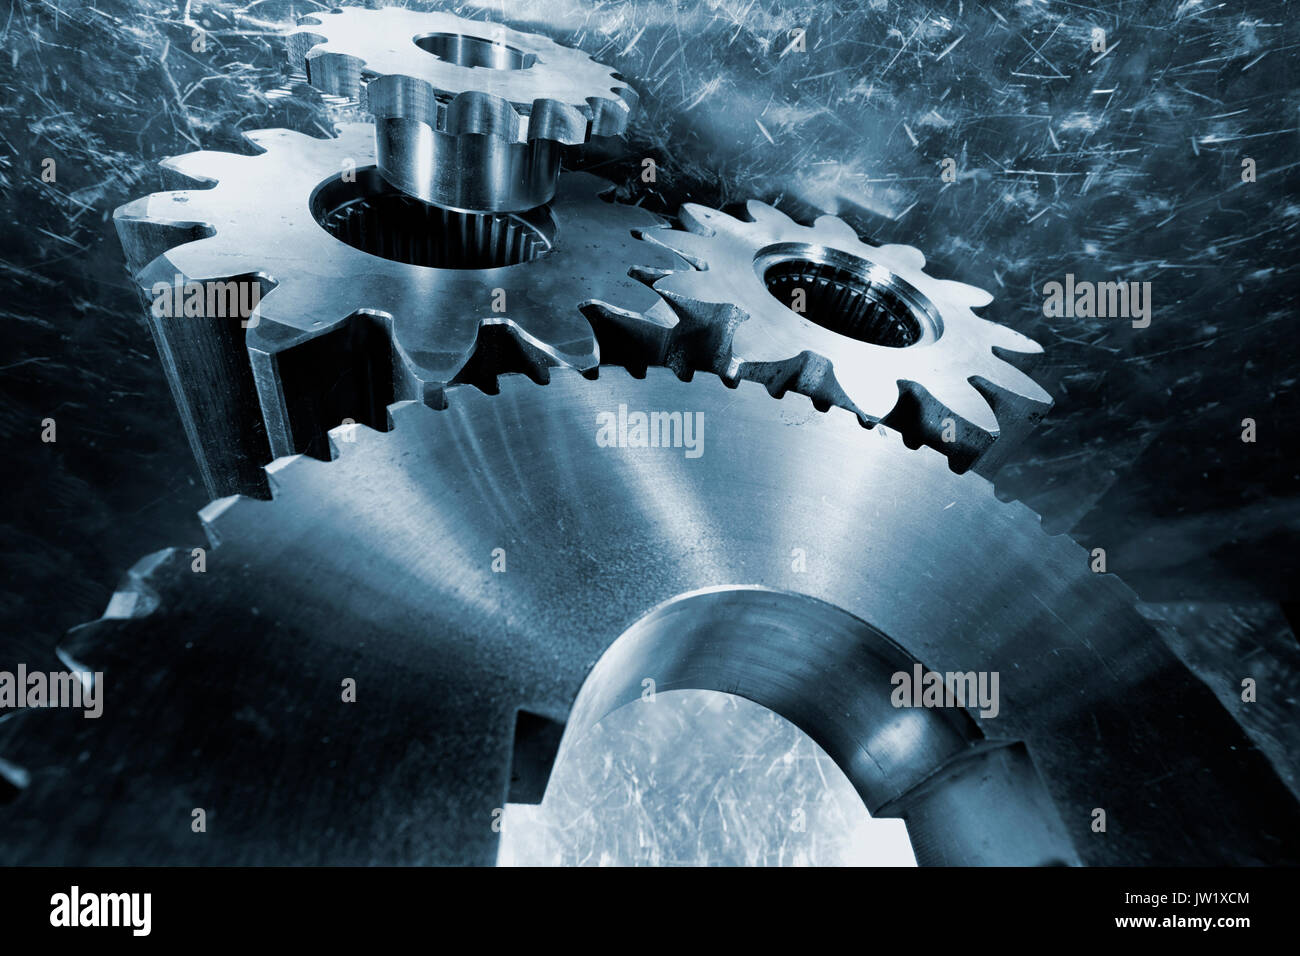 gears and bearings made of titanium, aerospace parts and engineering Stock Photo